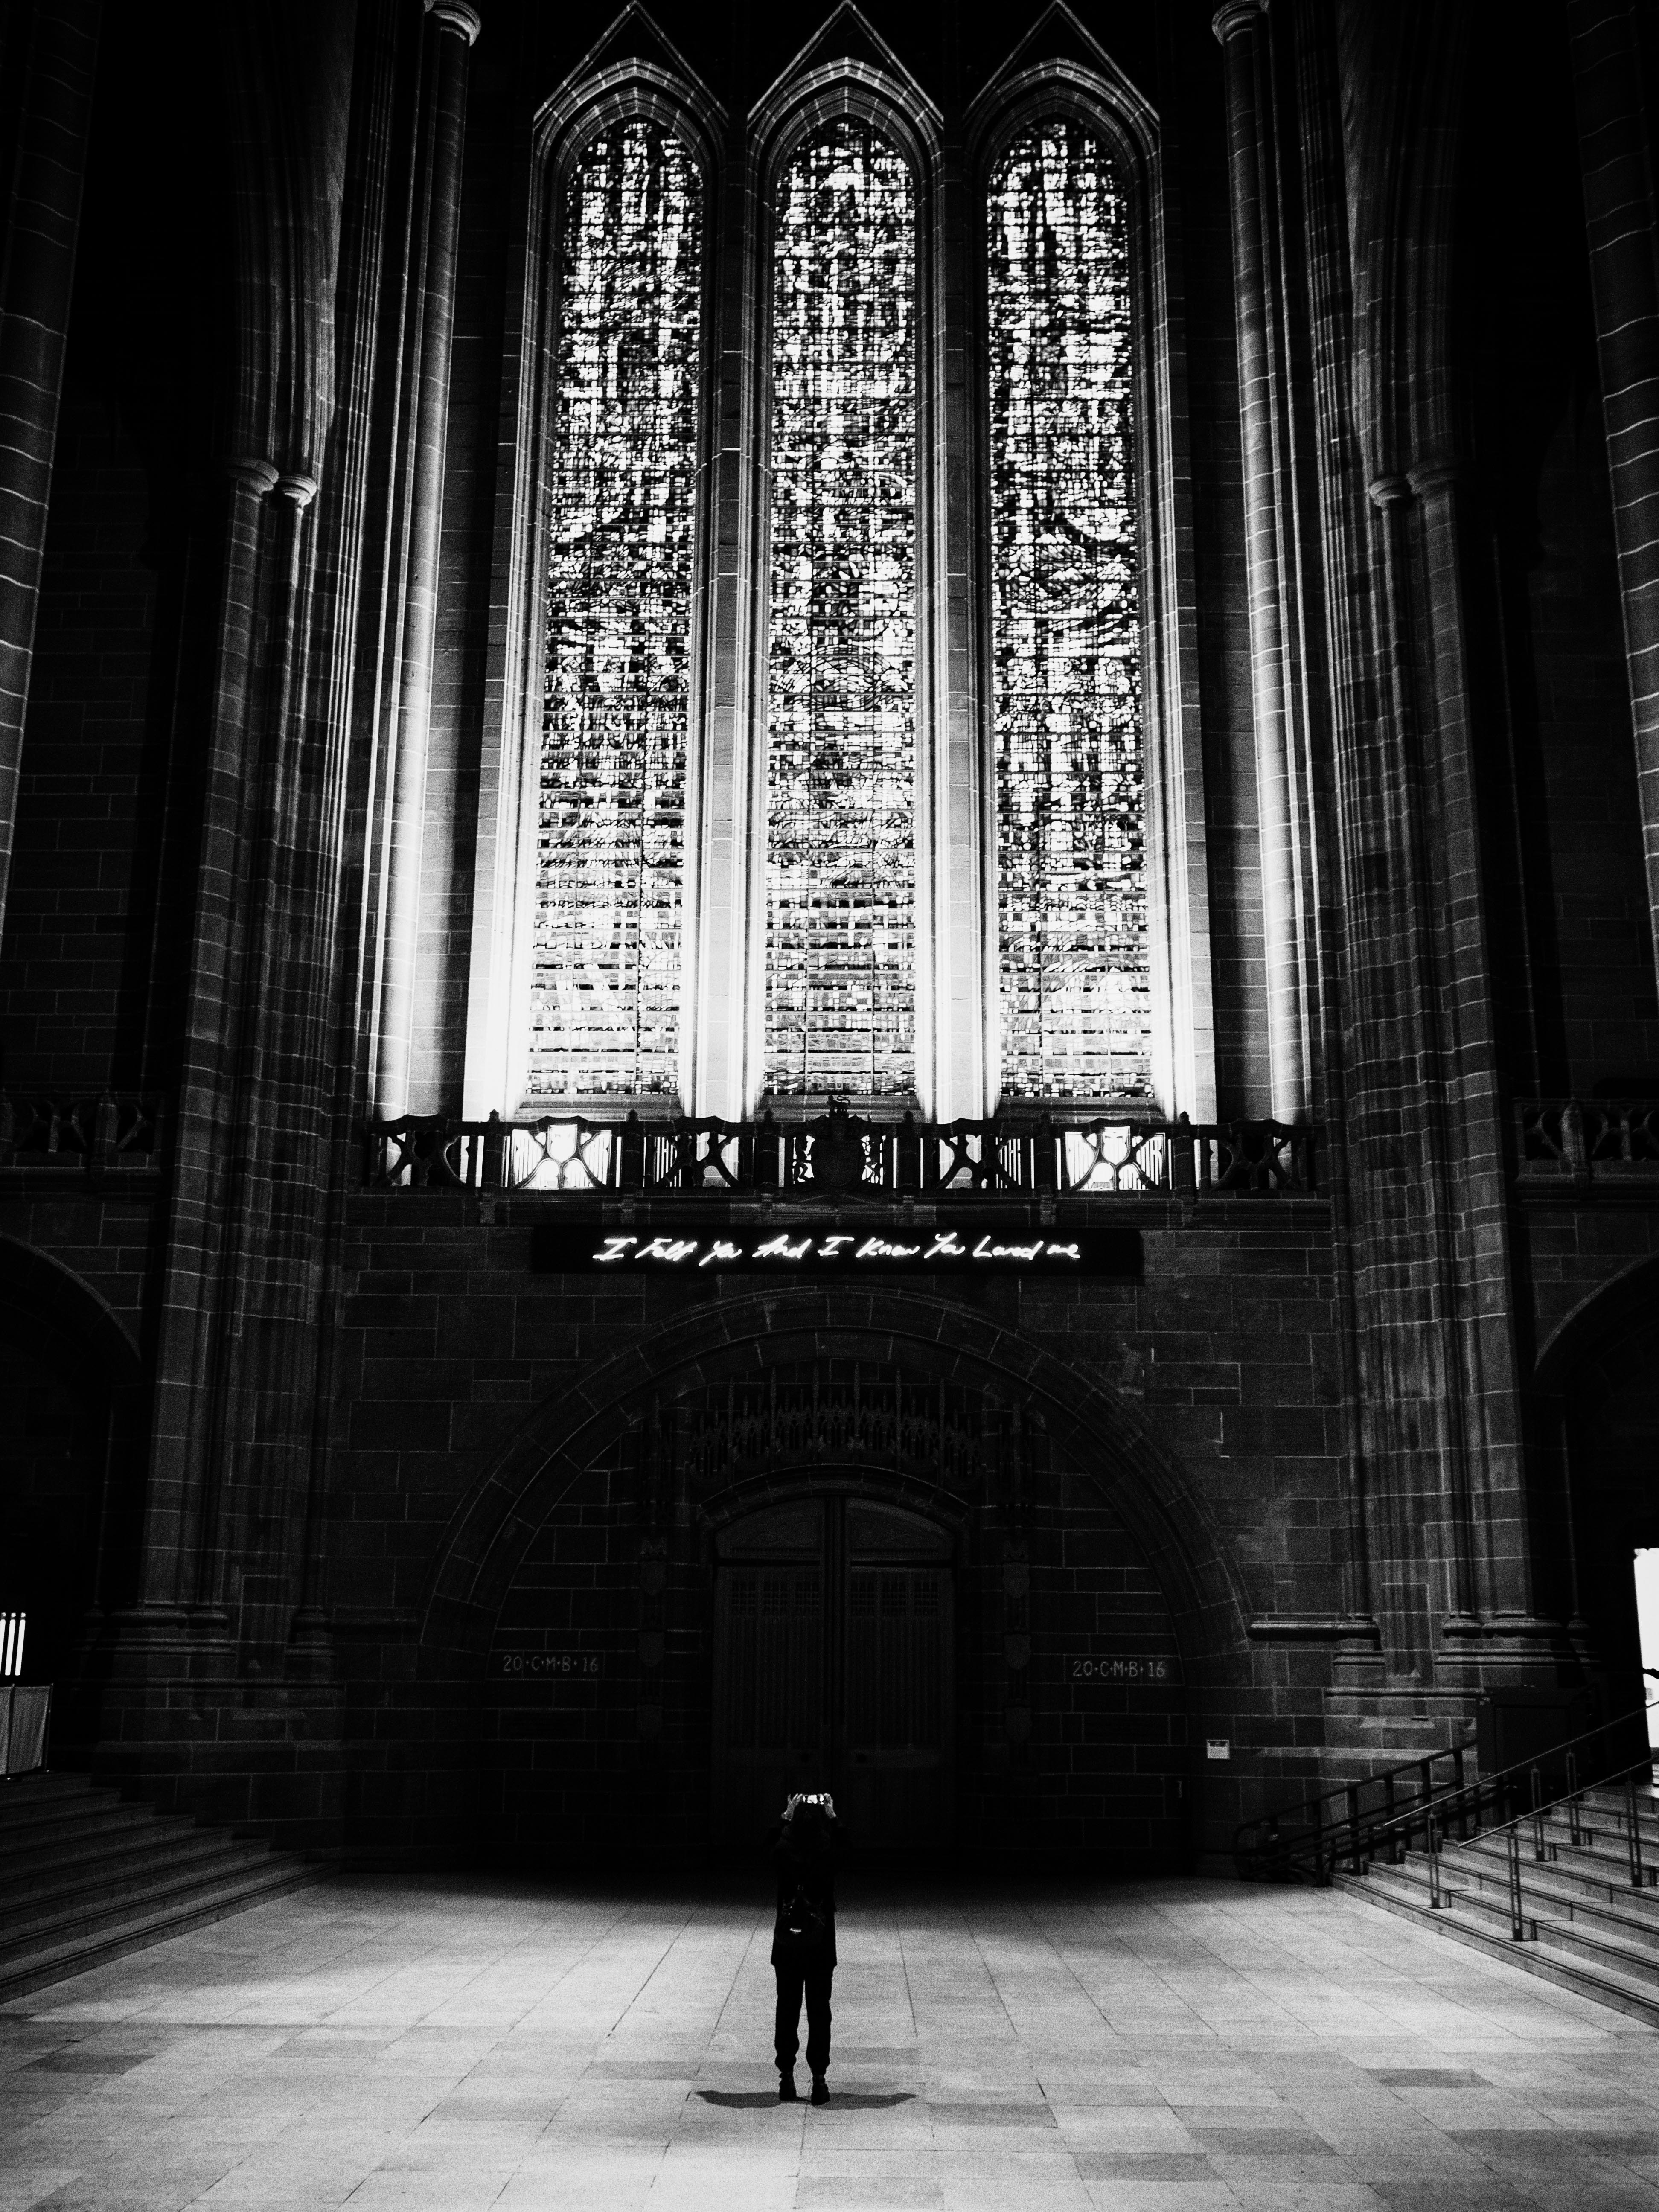 A solitary figure stands in a church in front of three towering stained glass windows